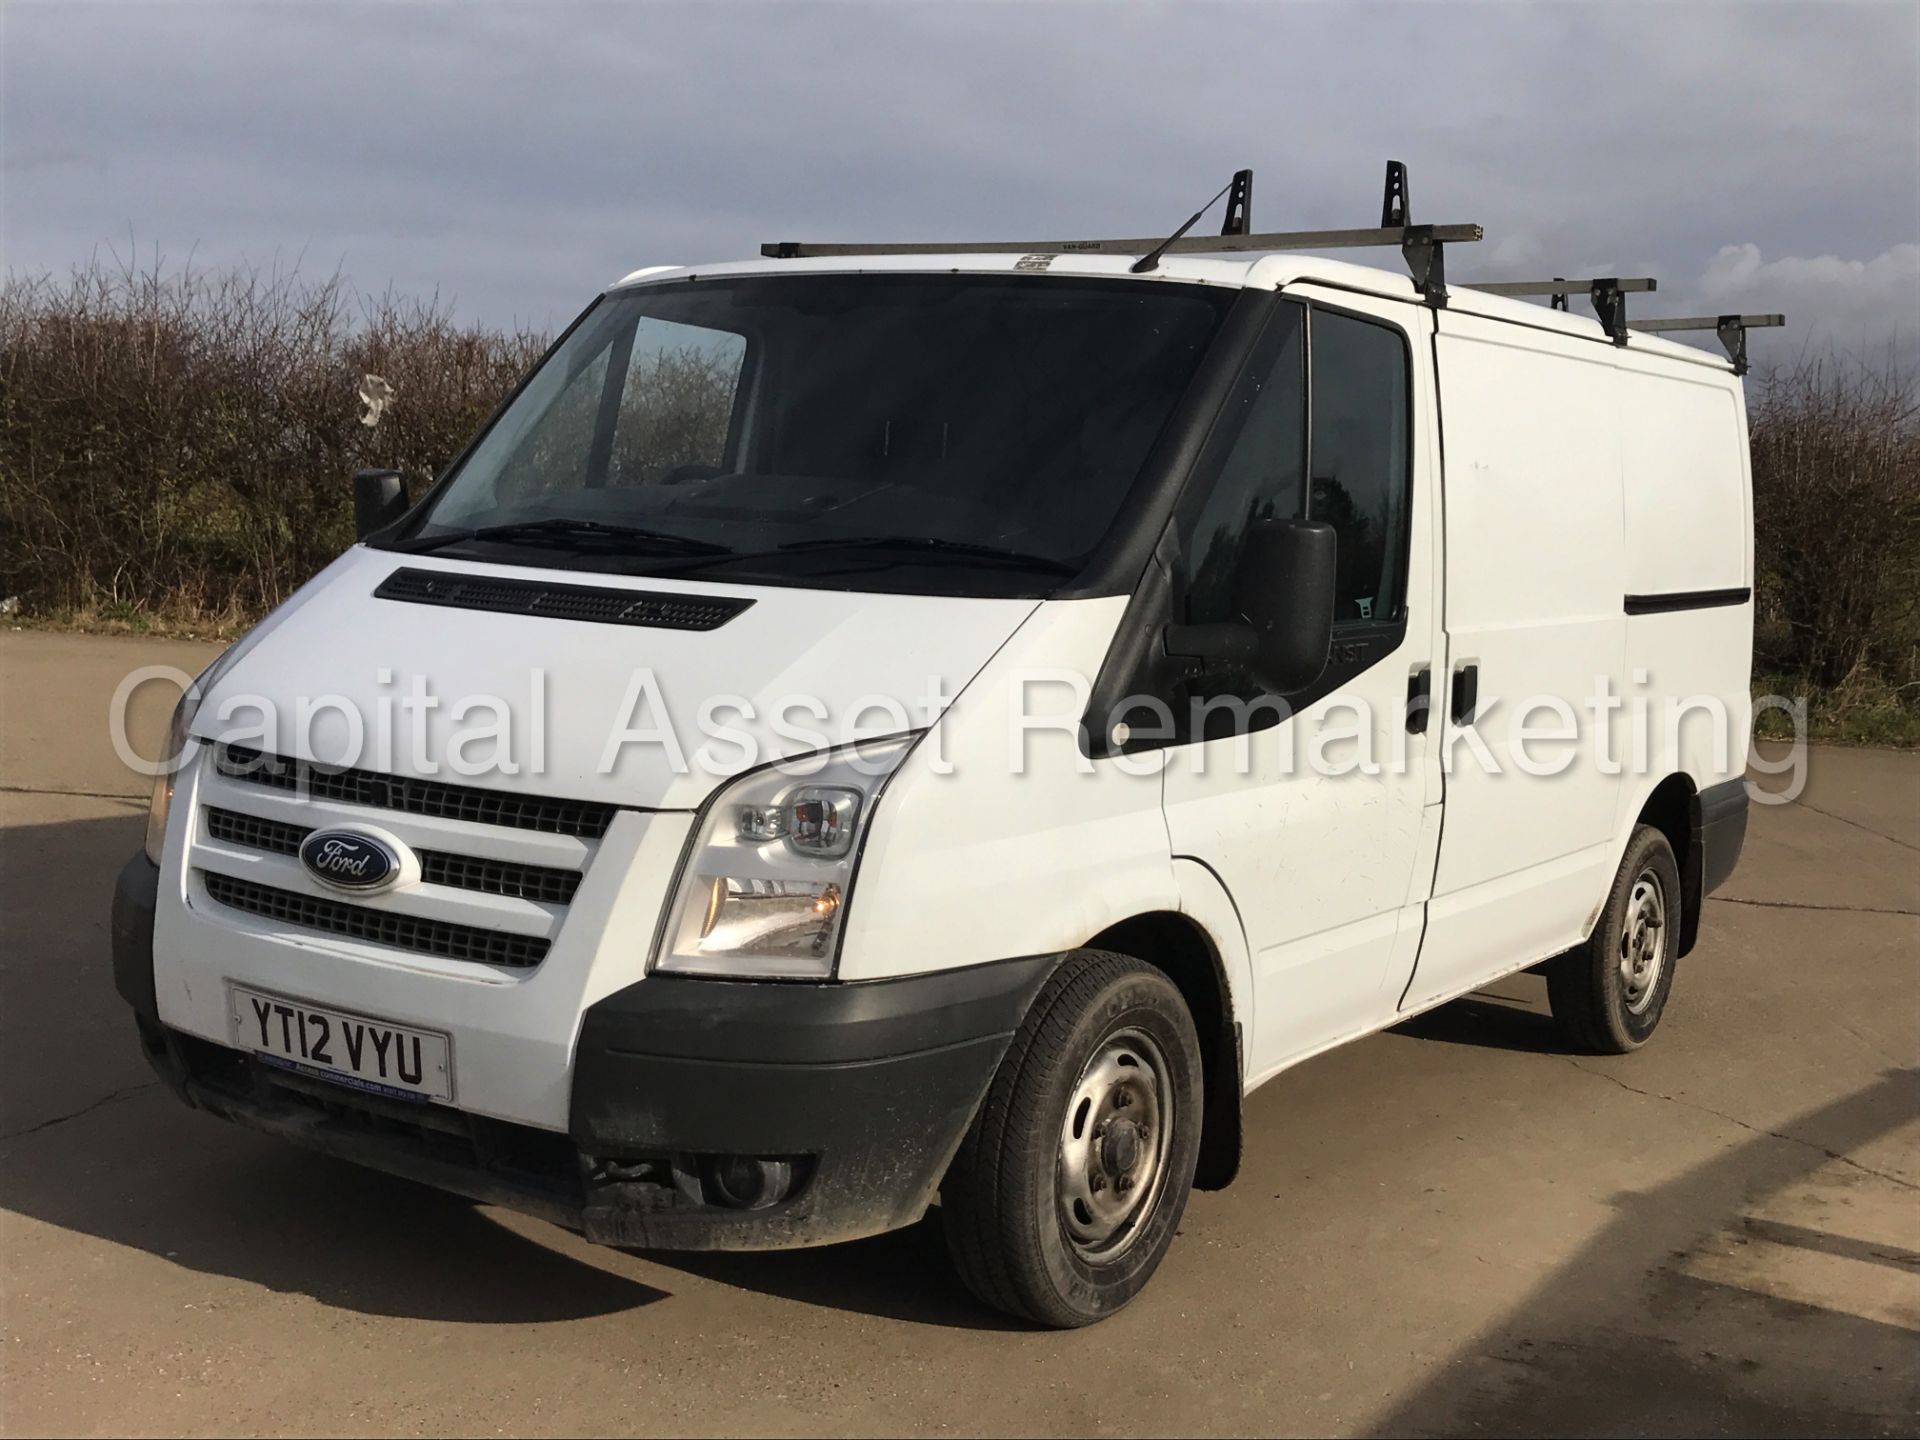 (On Sale) FORD TRANSIT 100 T280 FWD (2012) '2.2 TDCI - SWB - 100 PS - 6 SPEED' (1 FORMER KEEPER) - Image 4 of 19